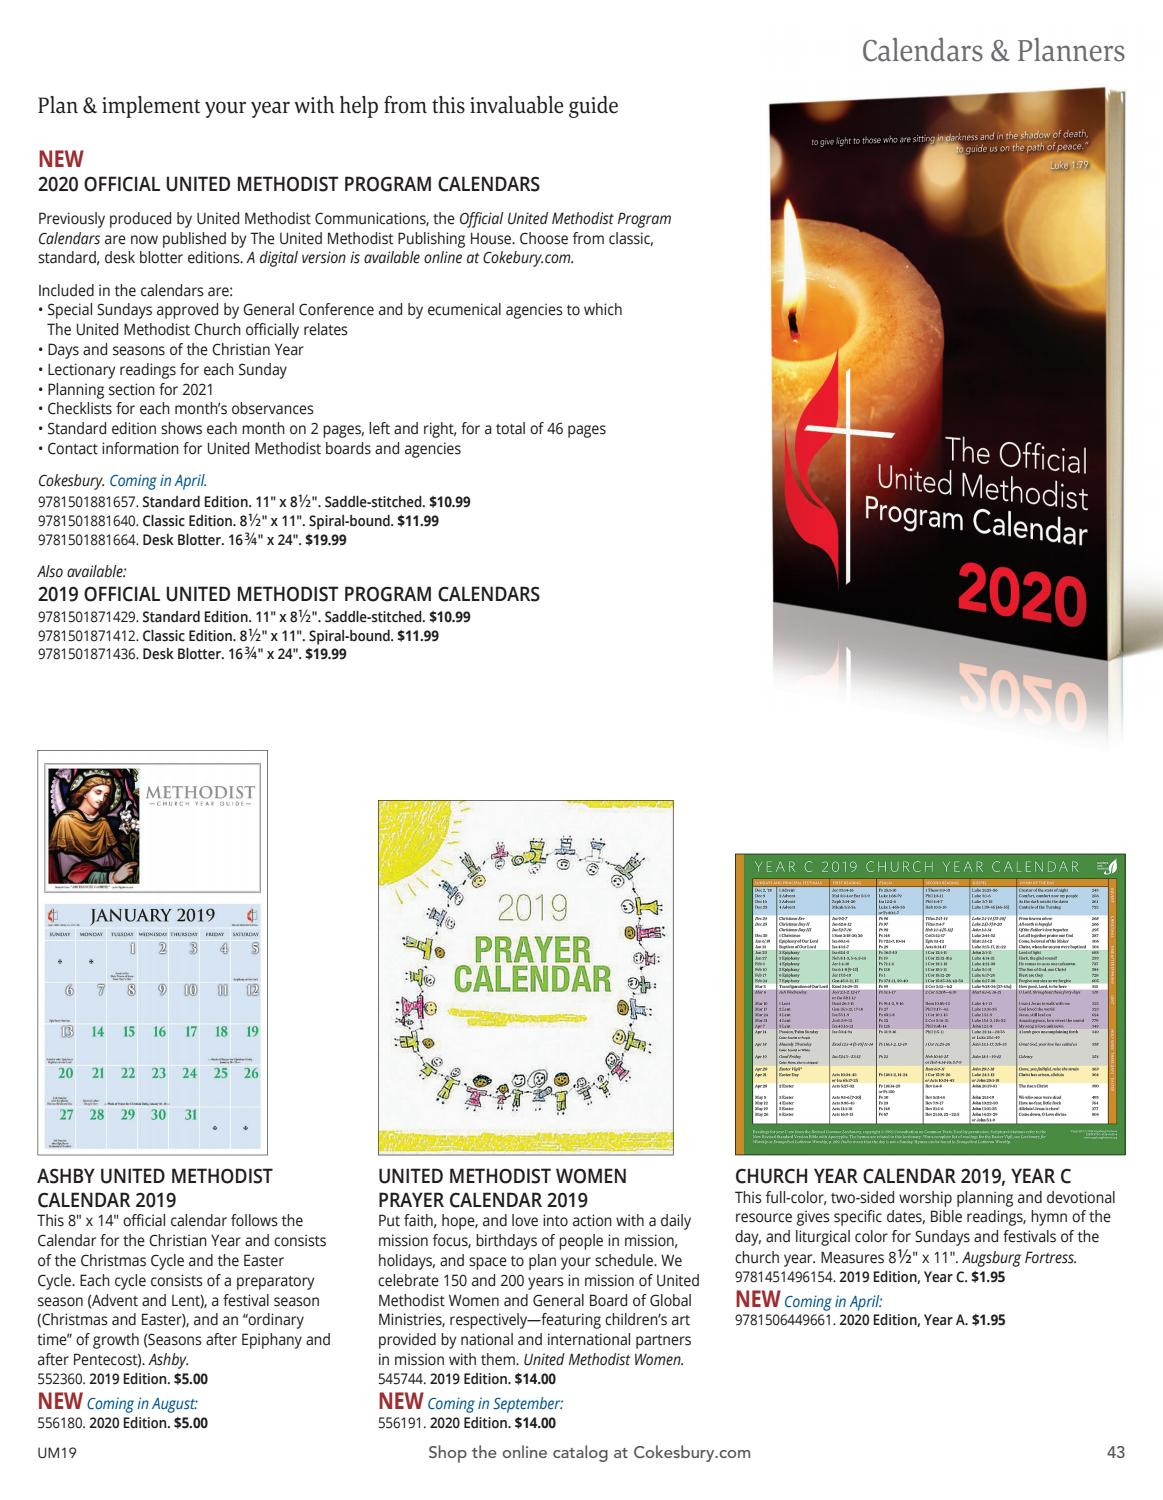 The United Methodist Church Resources For 2019 Catalog  Lectionary Readings 2021 United Methodist